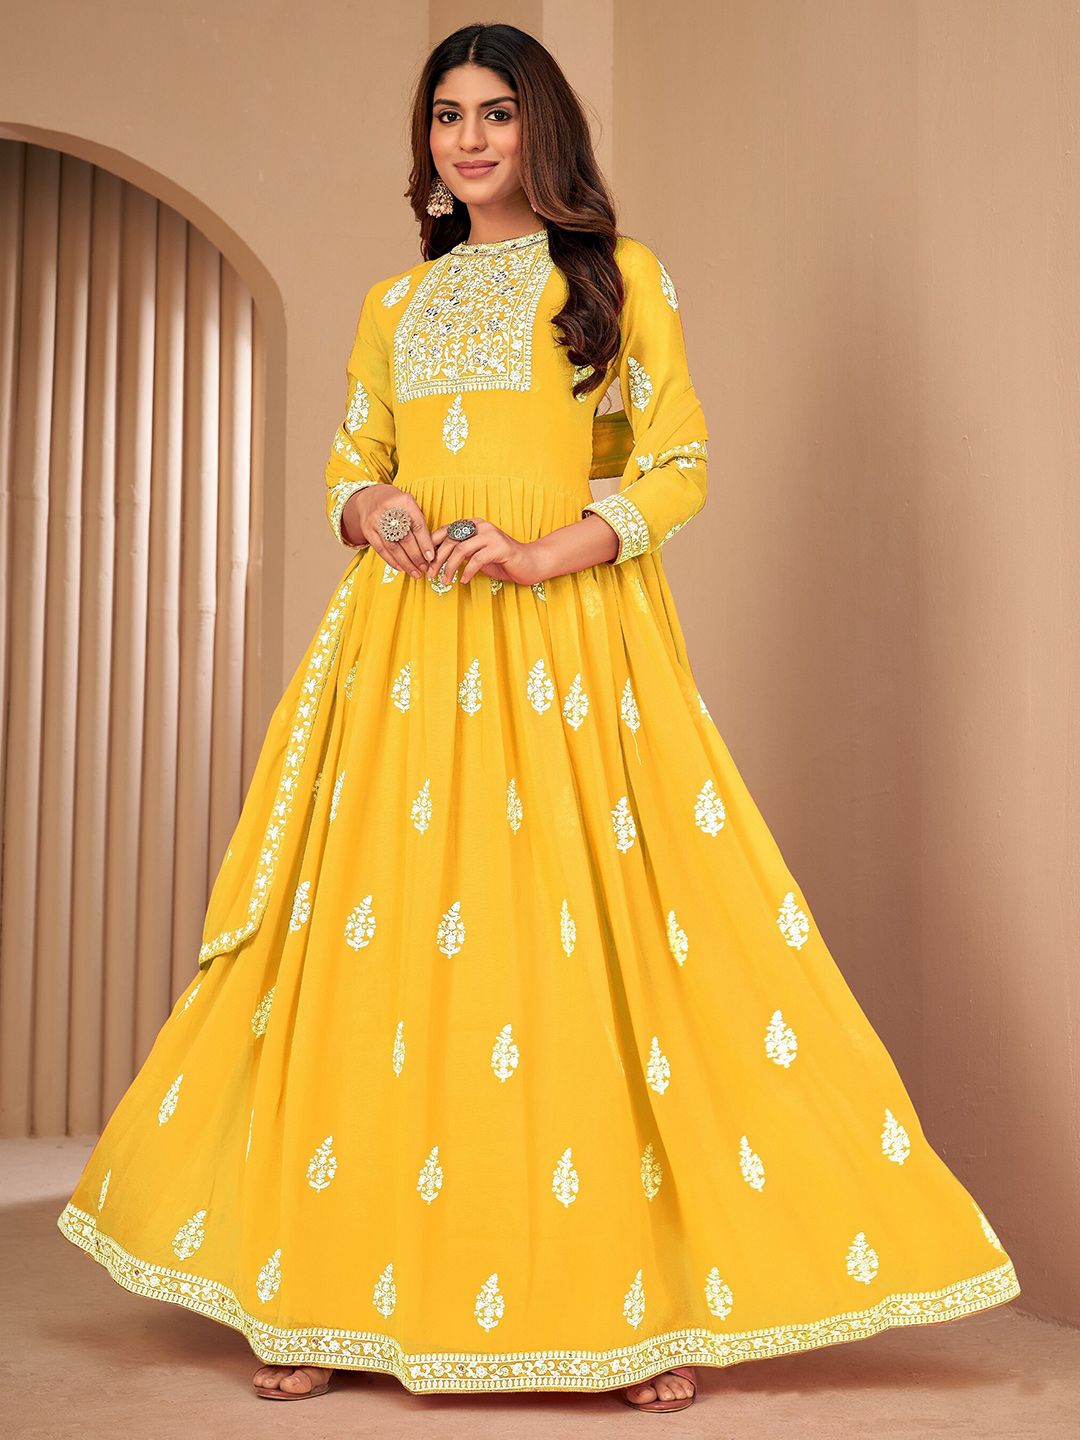 Divine International Trading Co Yellow & White Embroidered Unstitched Dress Material Price in India